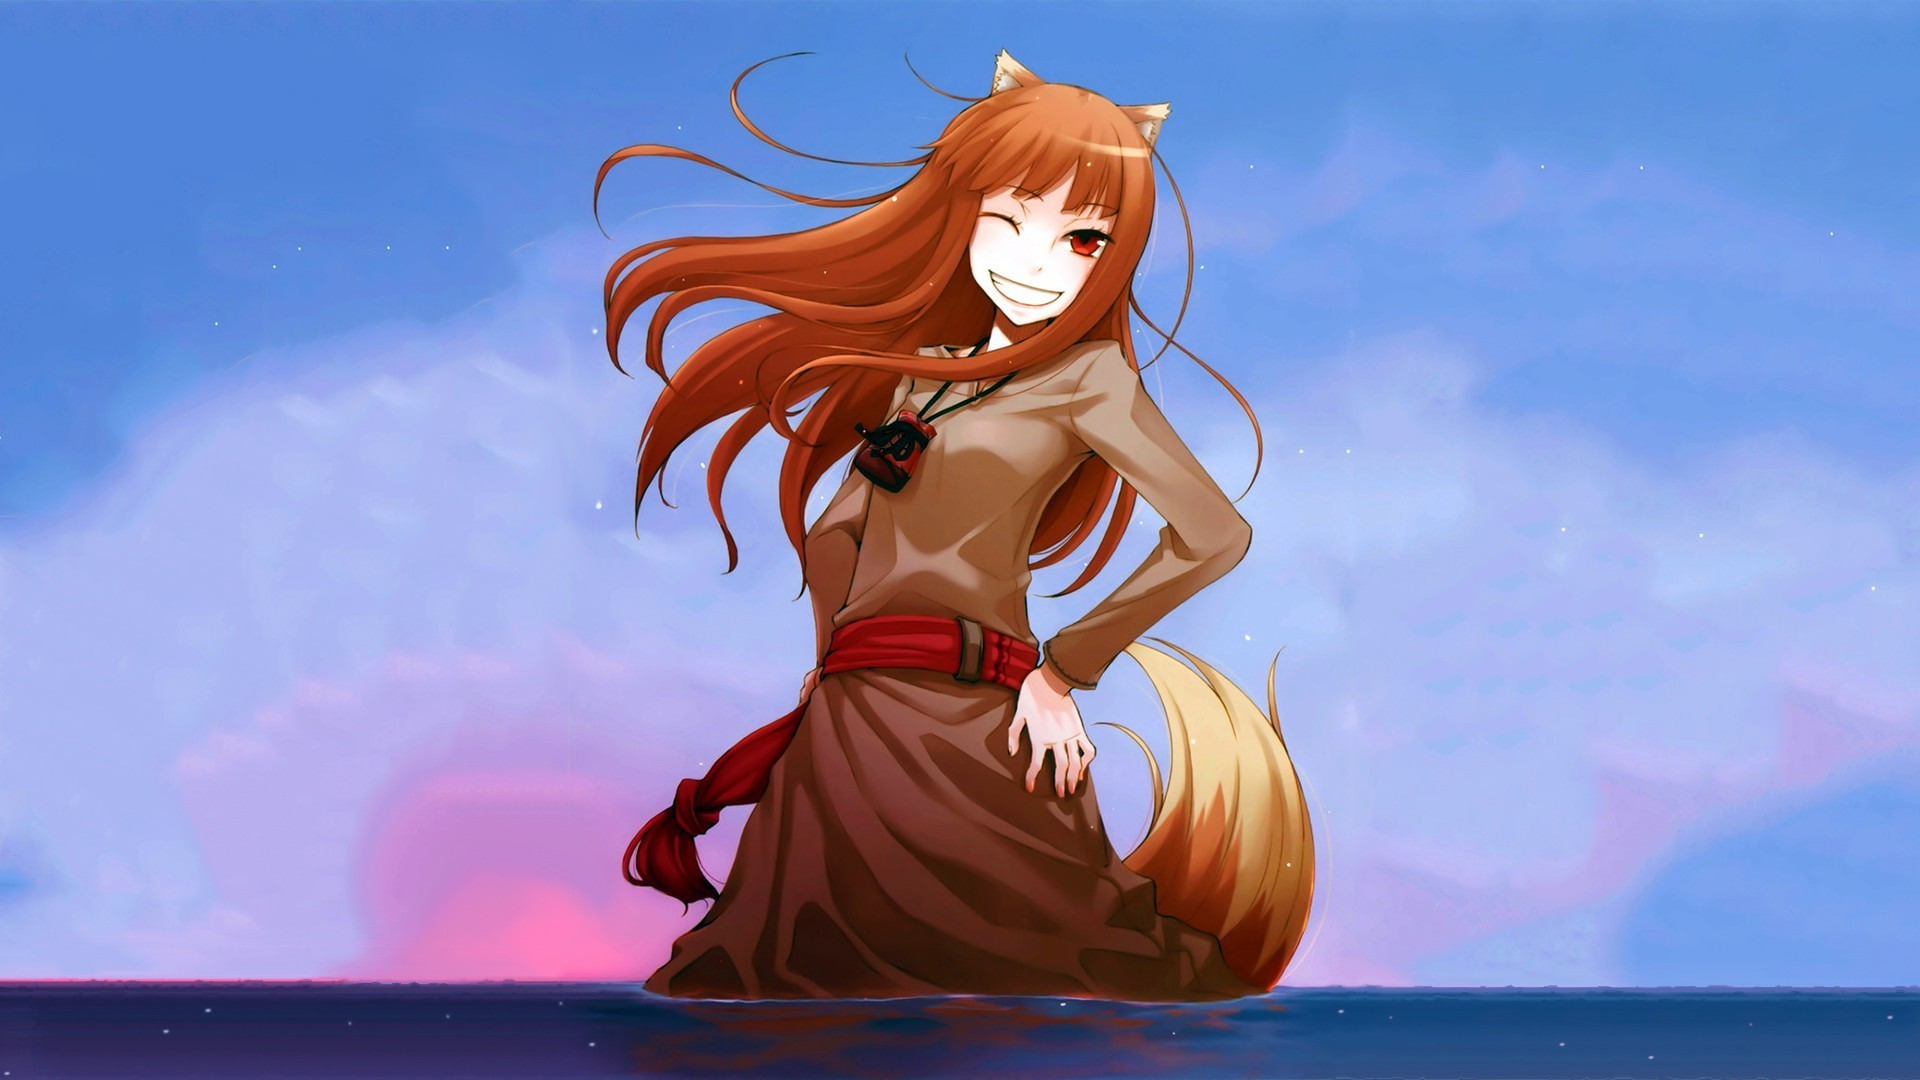 Anime, Anime Girls, Spice And Wolf, Holo, Kitsunemimi Wallpapers HD / Desktop and Mobile Backgrounds